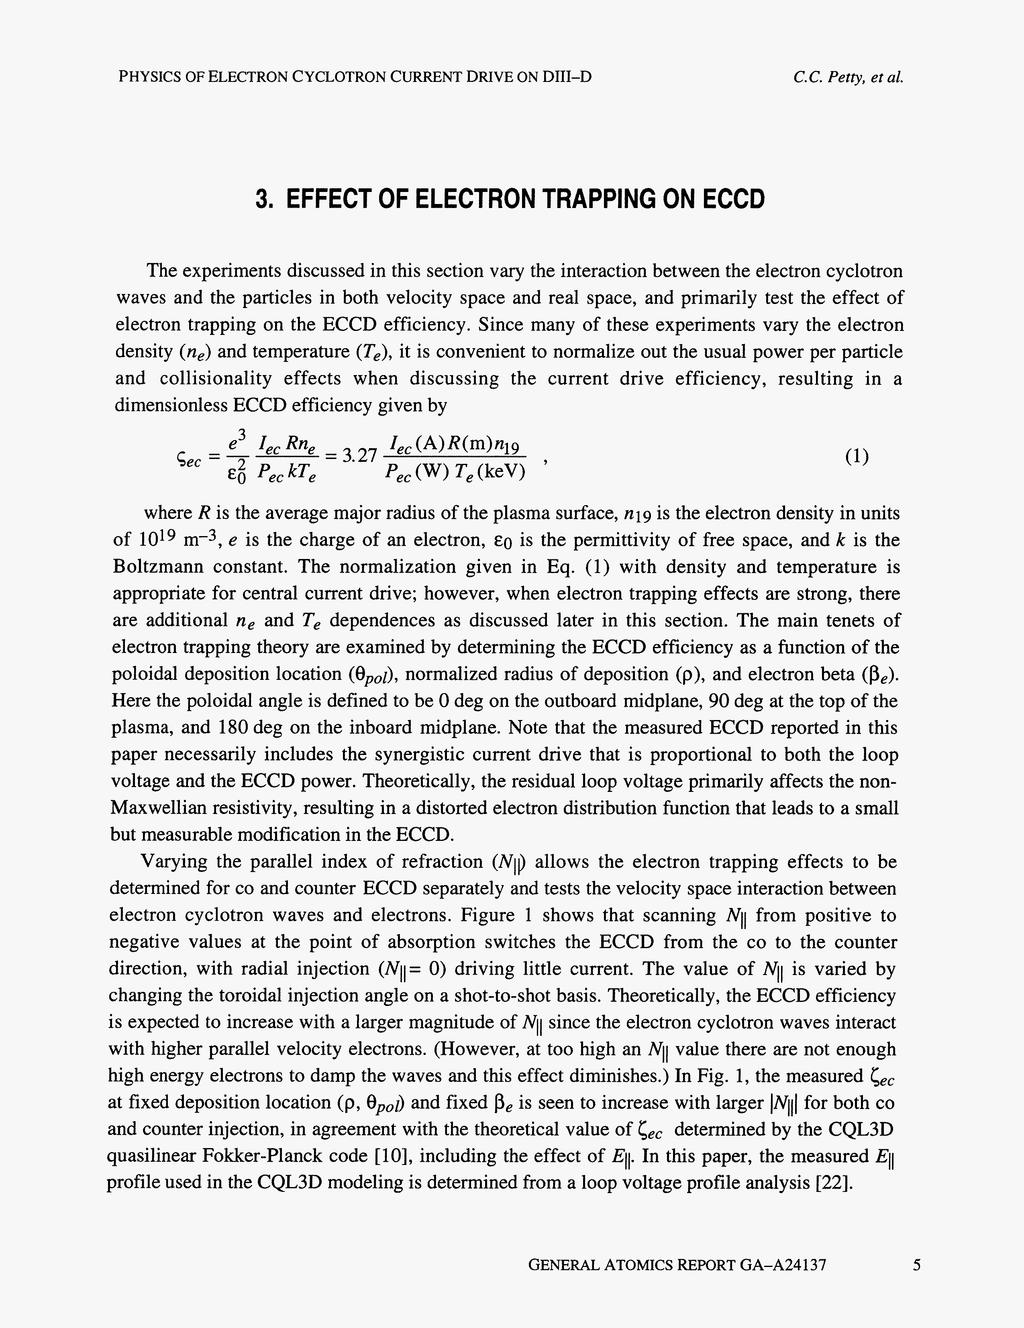 3. EFFECT OF ELECTRON TRAPPNG ON ECCD The experiments discussed in this section vary the interaction between the electron cyclotron waves and the particles in both velocity space and real space, and